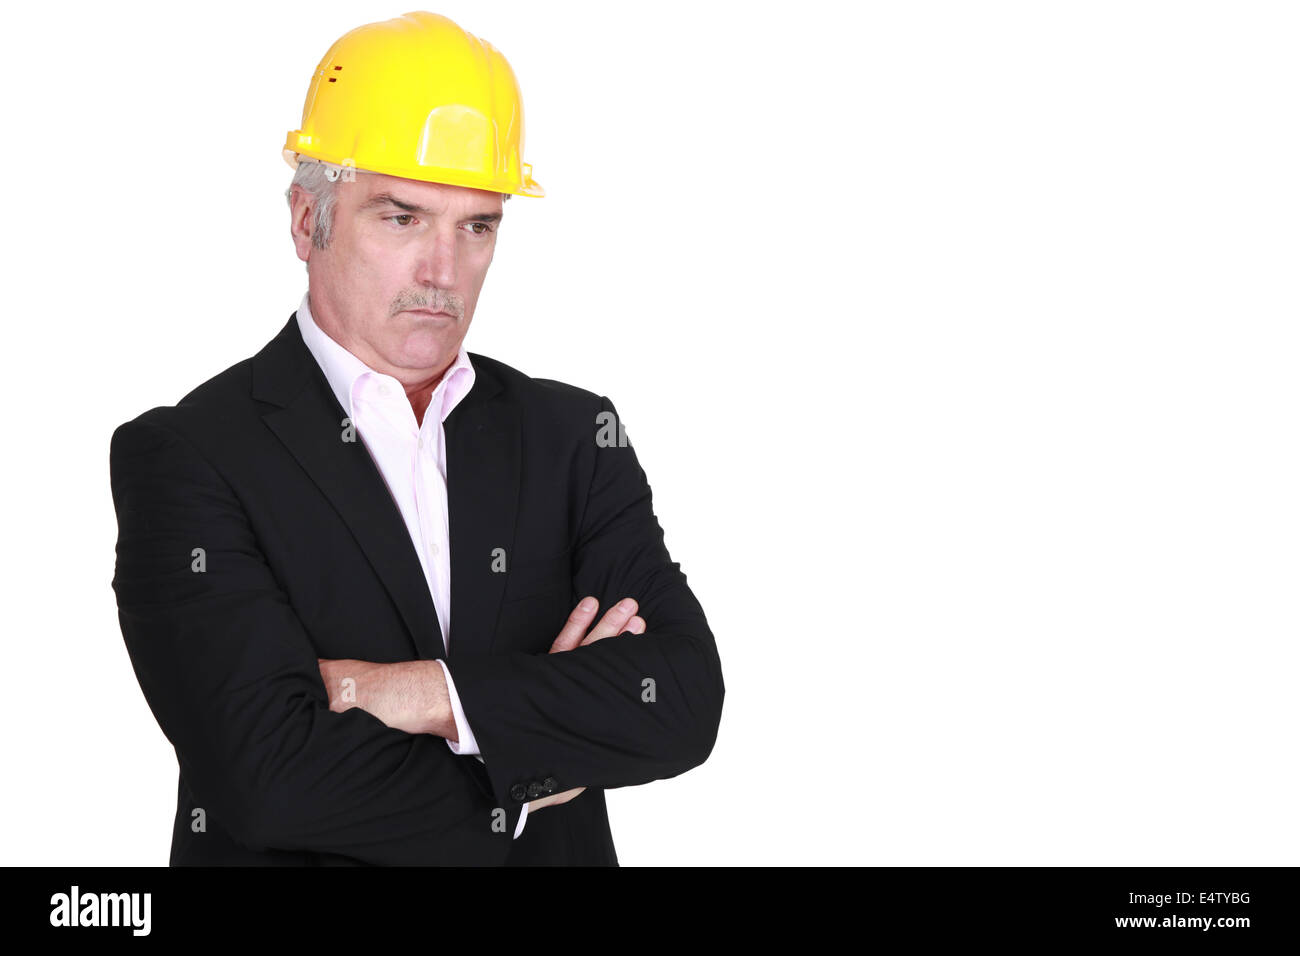 Serious looking architect Stock Photo